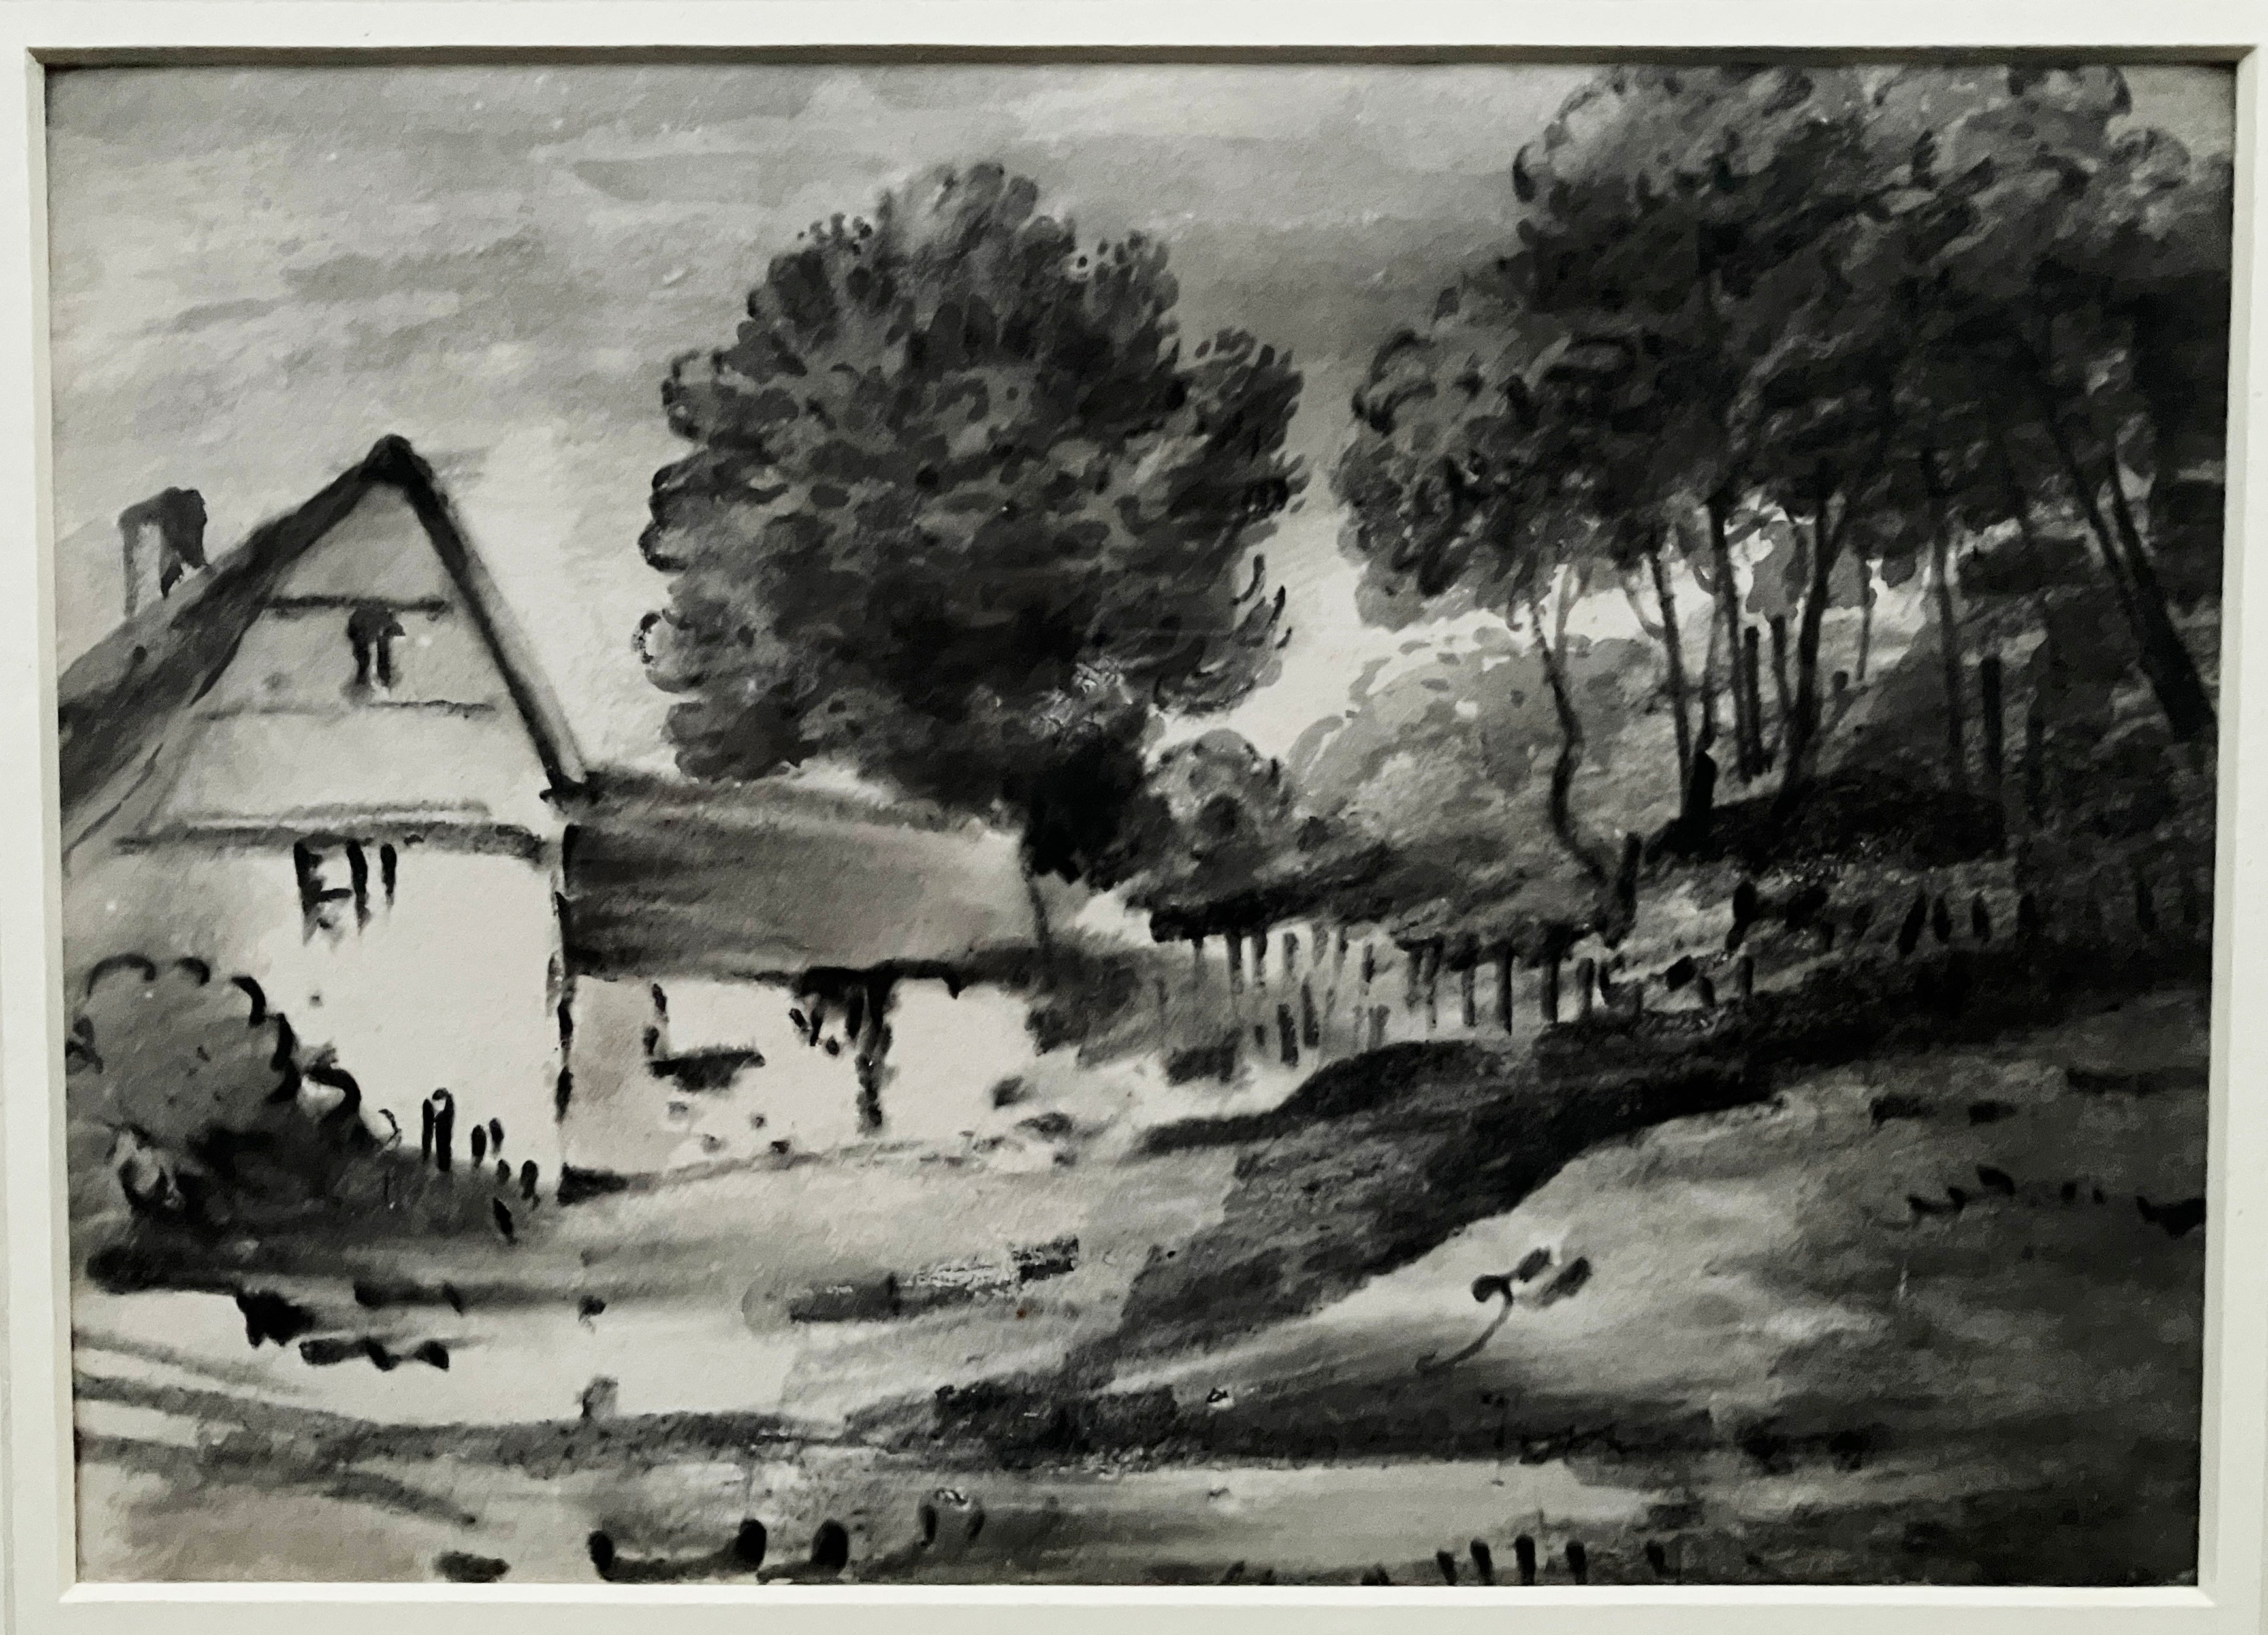 Dr Thomas Monro (c.1790s). Black chalk, wash and brush – house in wooded valley